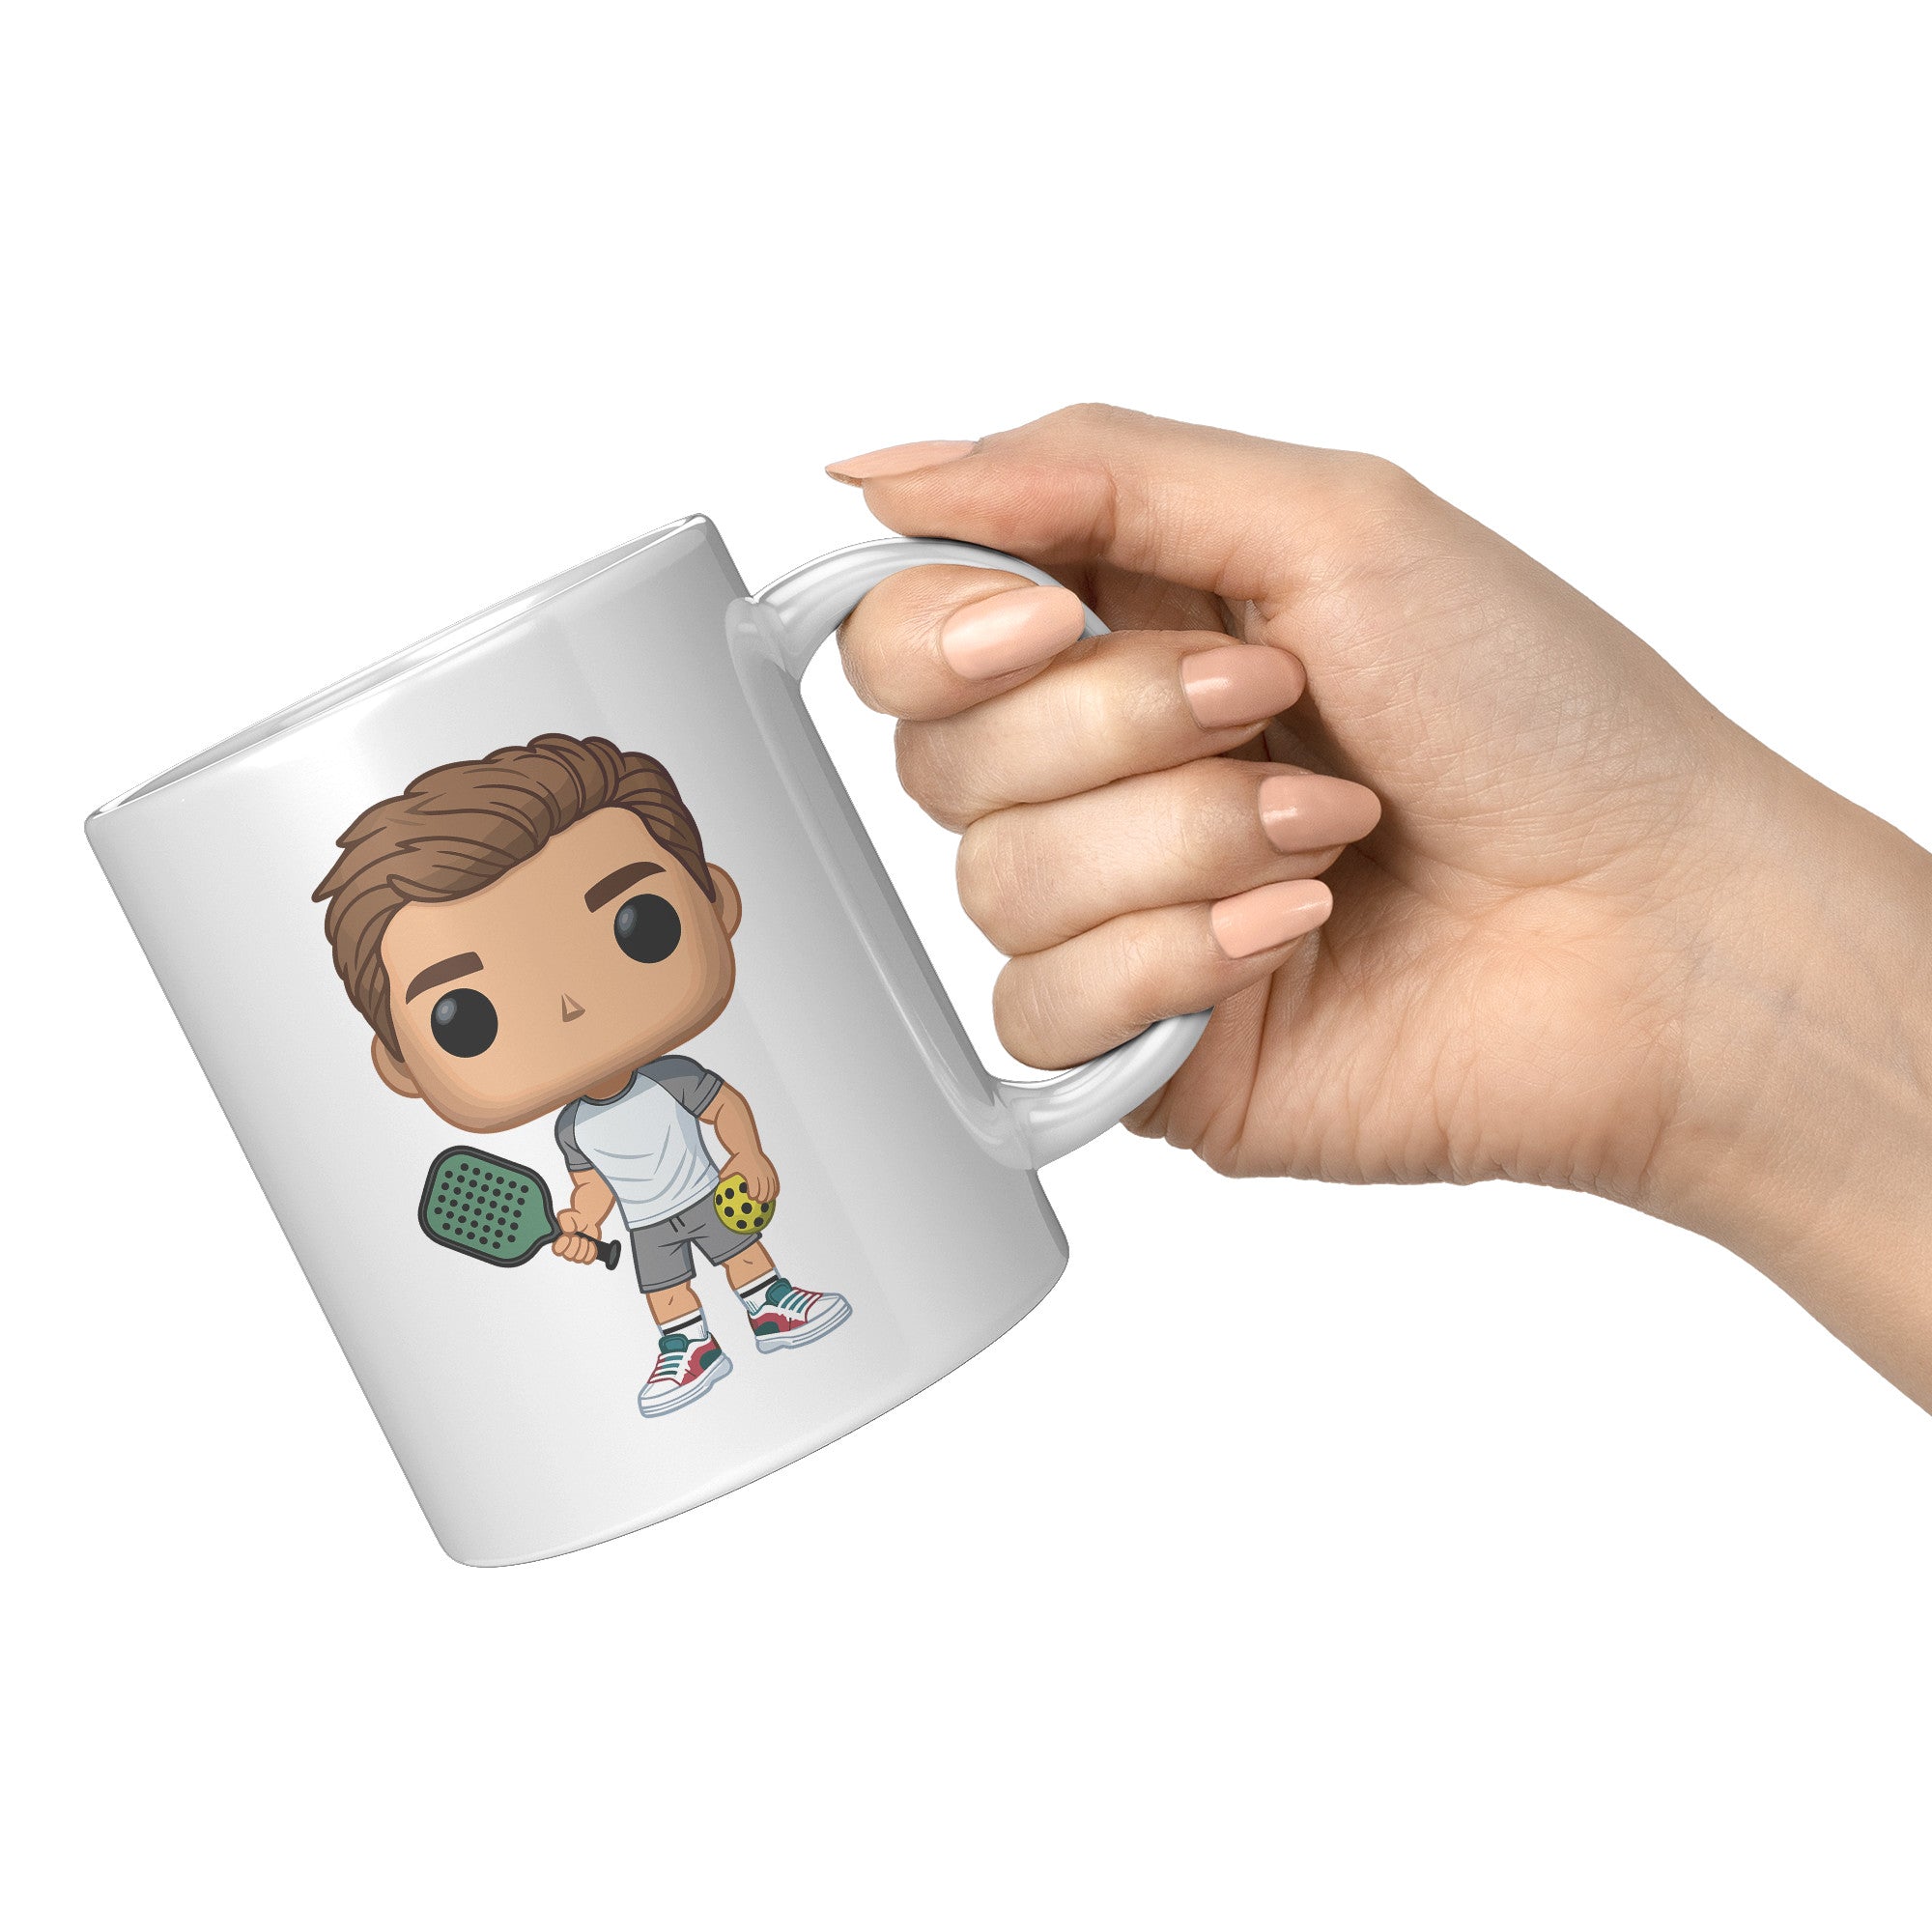 "Funko Pop Style Pickle Ball Player Boy Coffee Mug - Cute Athletic Cup - Perfect Gift for Pickle Ball Enthusiasts - Sporty Boy Apparel" - C